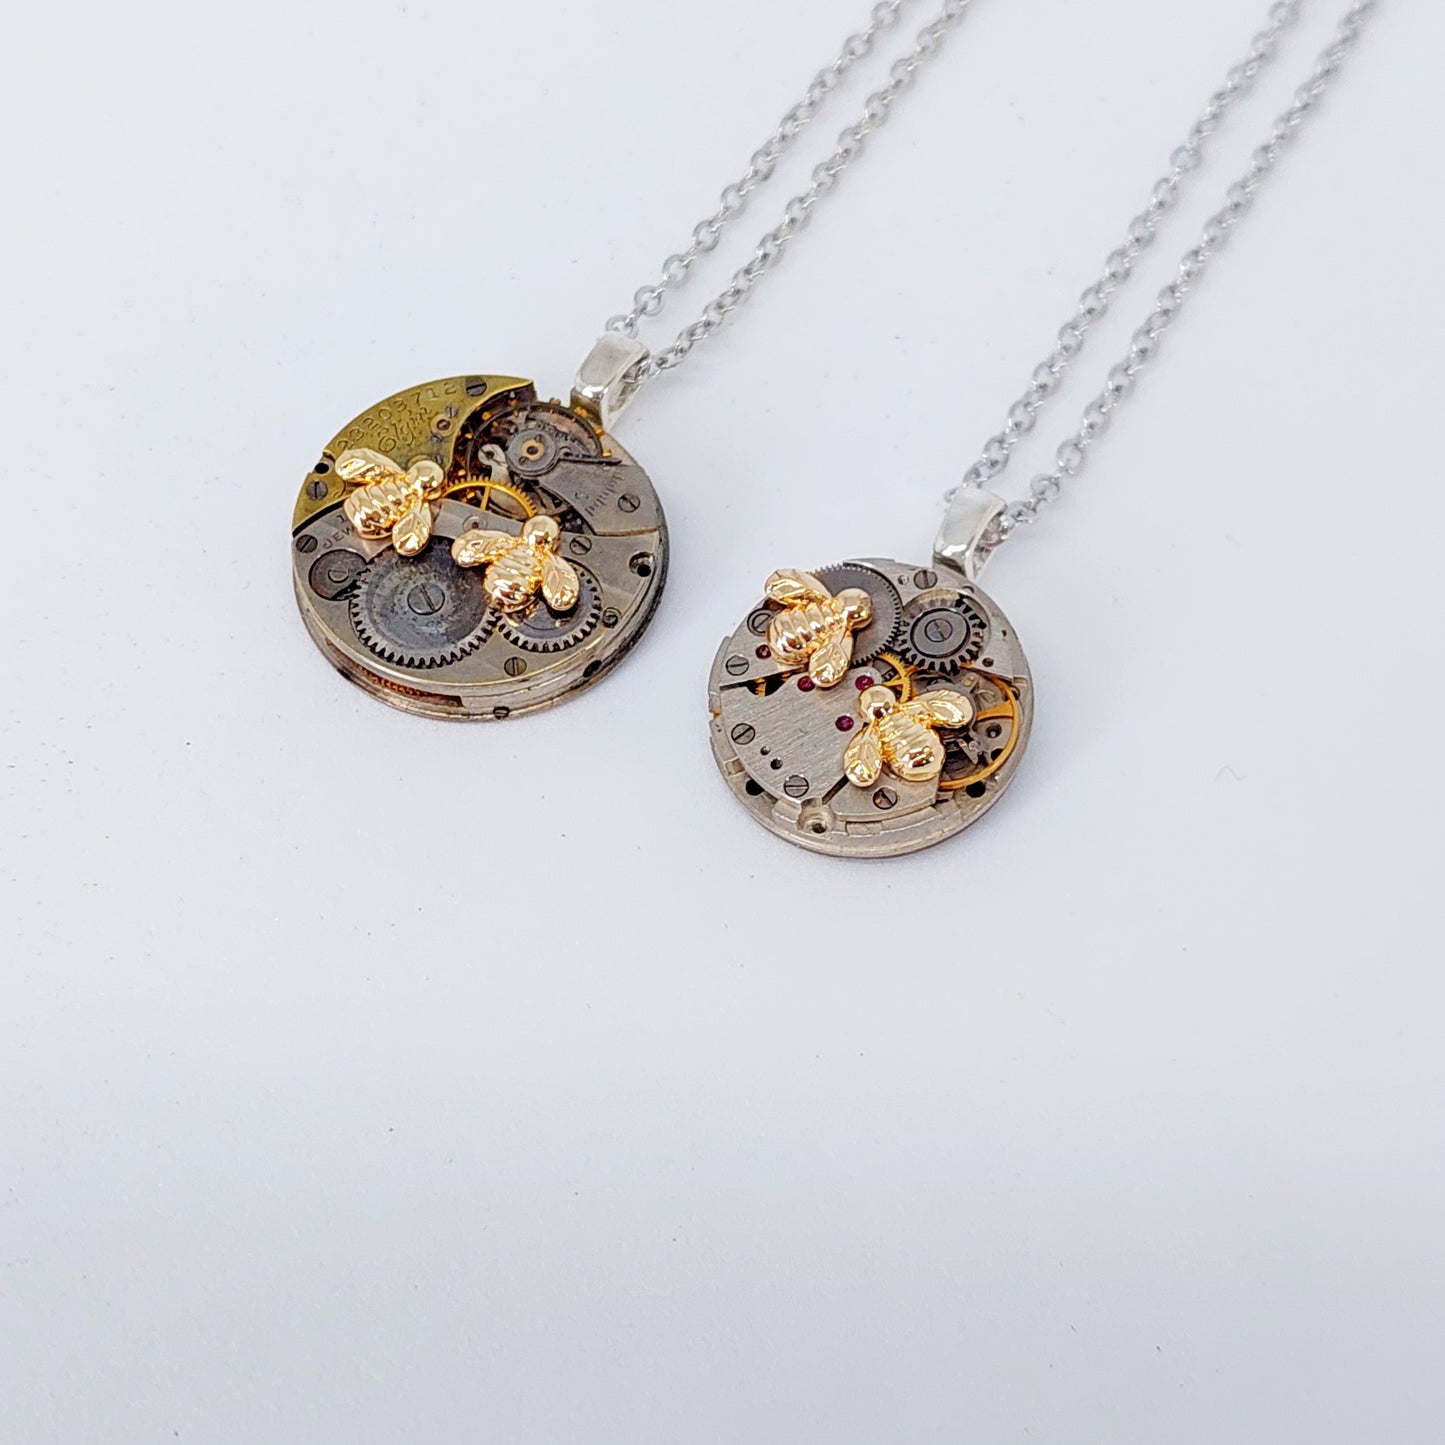 NEW!! Mini timepiece pendant with tiny golden bees